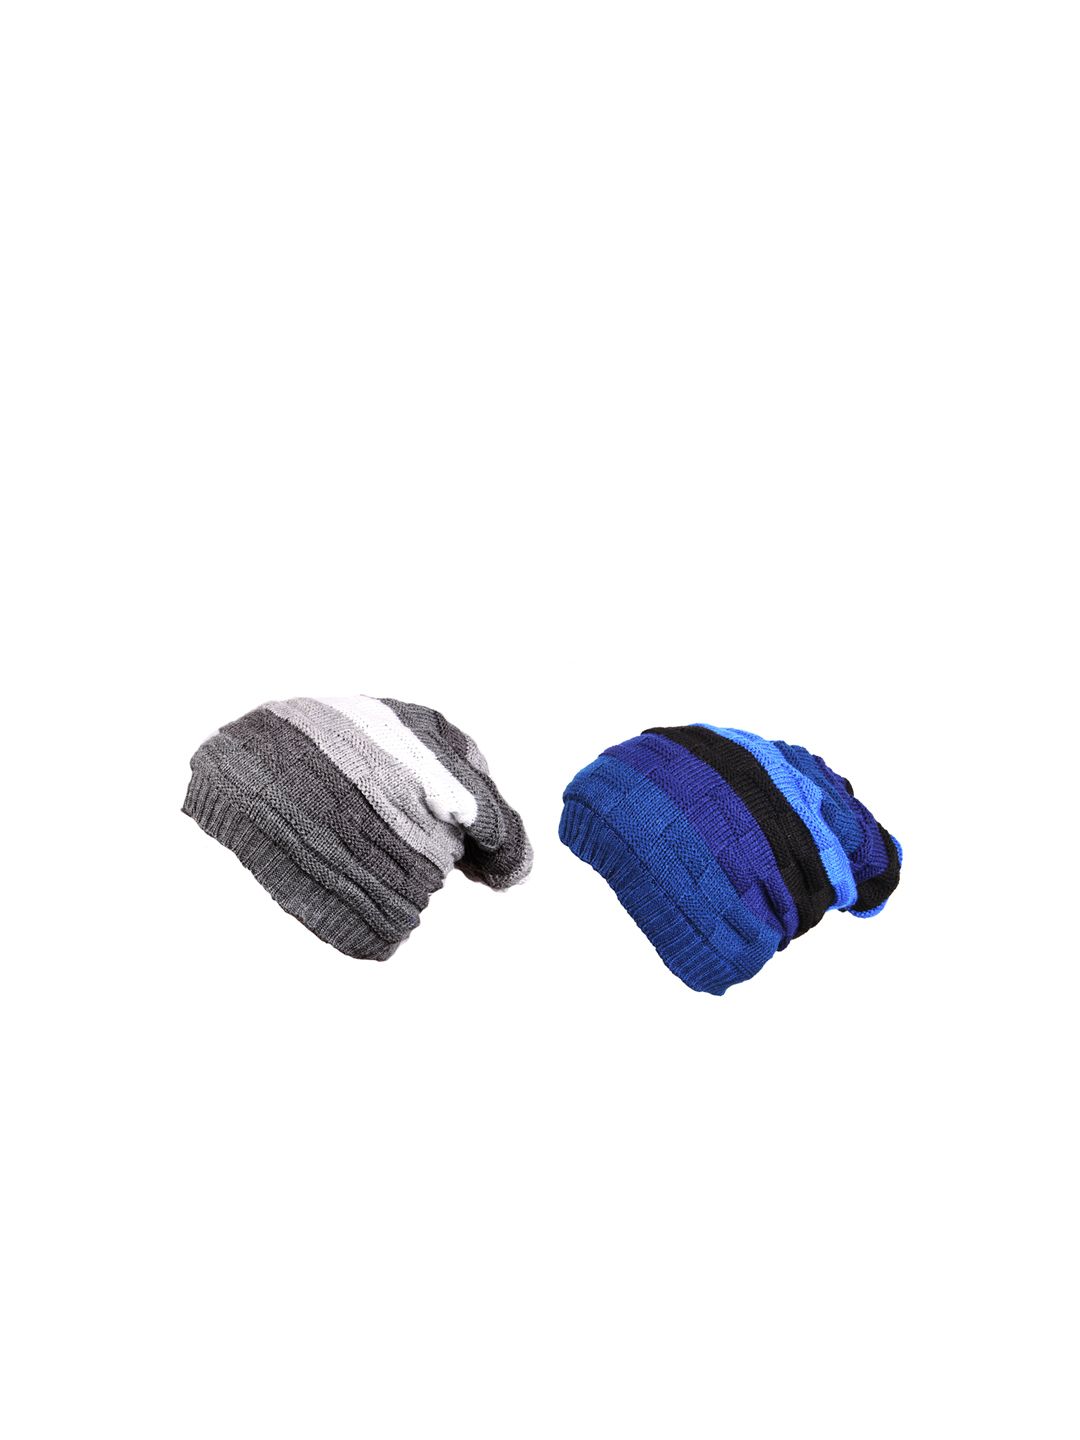 Knotyy Unisex Set of 2 Beanies Price in India